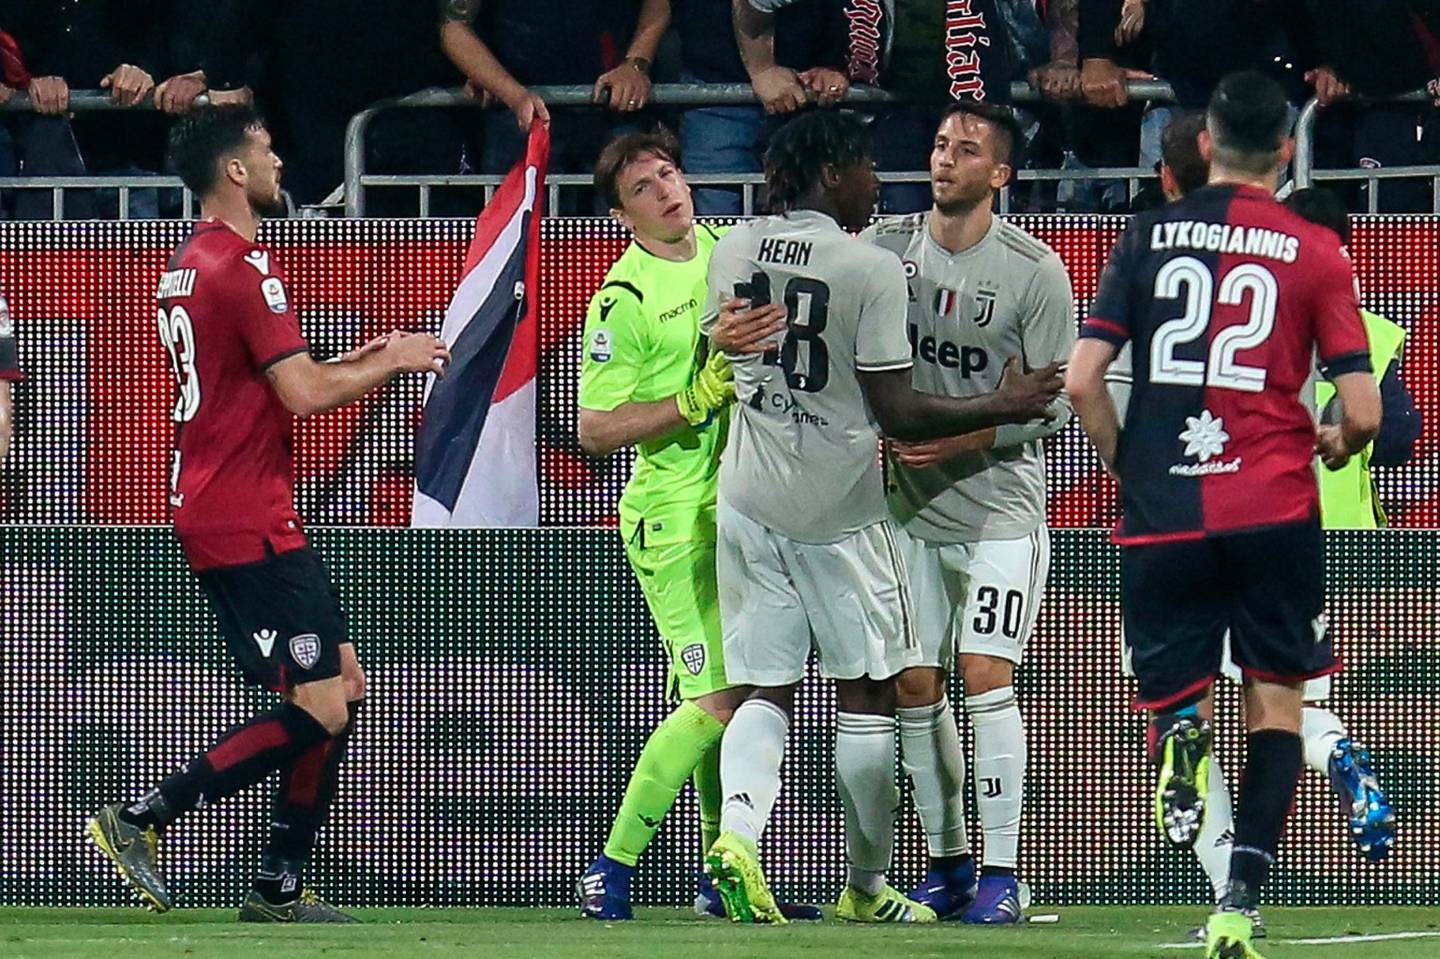 Juventus' Moise Kean, third from left, is restrained by Cagliari goalie Alessio Cragno, 2nd left, and his teammate Rodrigo Bentancur as he celebrates in front of Cagliari fans after scoring his side's second goal during a Serie A soccer match between Cagliari and Juventus at the Sardegna Arena Stadium in Cagliari, Italy, Tuesday, April 2, 2019. Cagliari fans shouted racist chants at Kean after the 19-year-old scored in the 85th minute, the chants were so bad that Cagliari captain Luca Ceppitelli rushed in to protect the youngster and ask the fans to stop. (Fabio Murru/ANSA via AP)